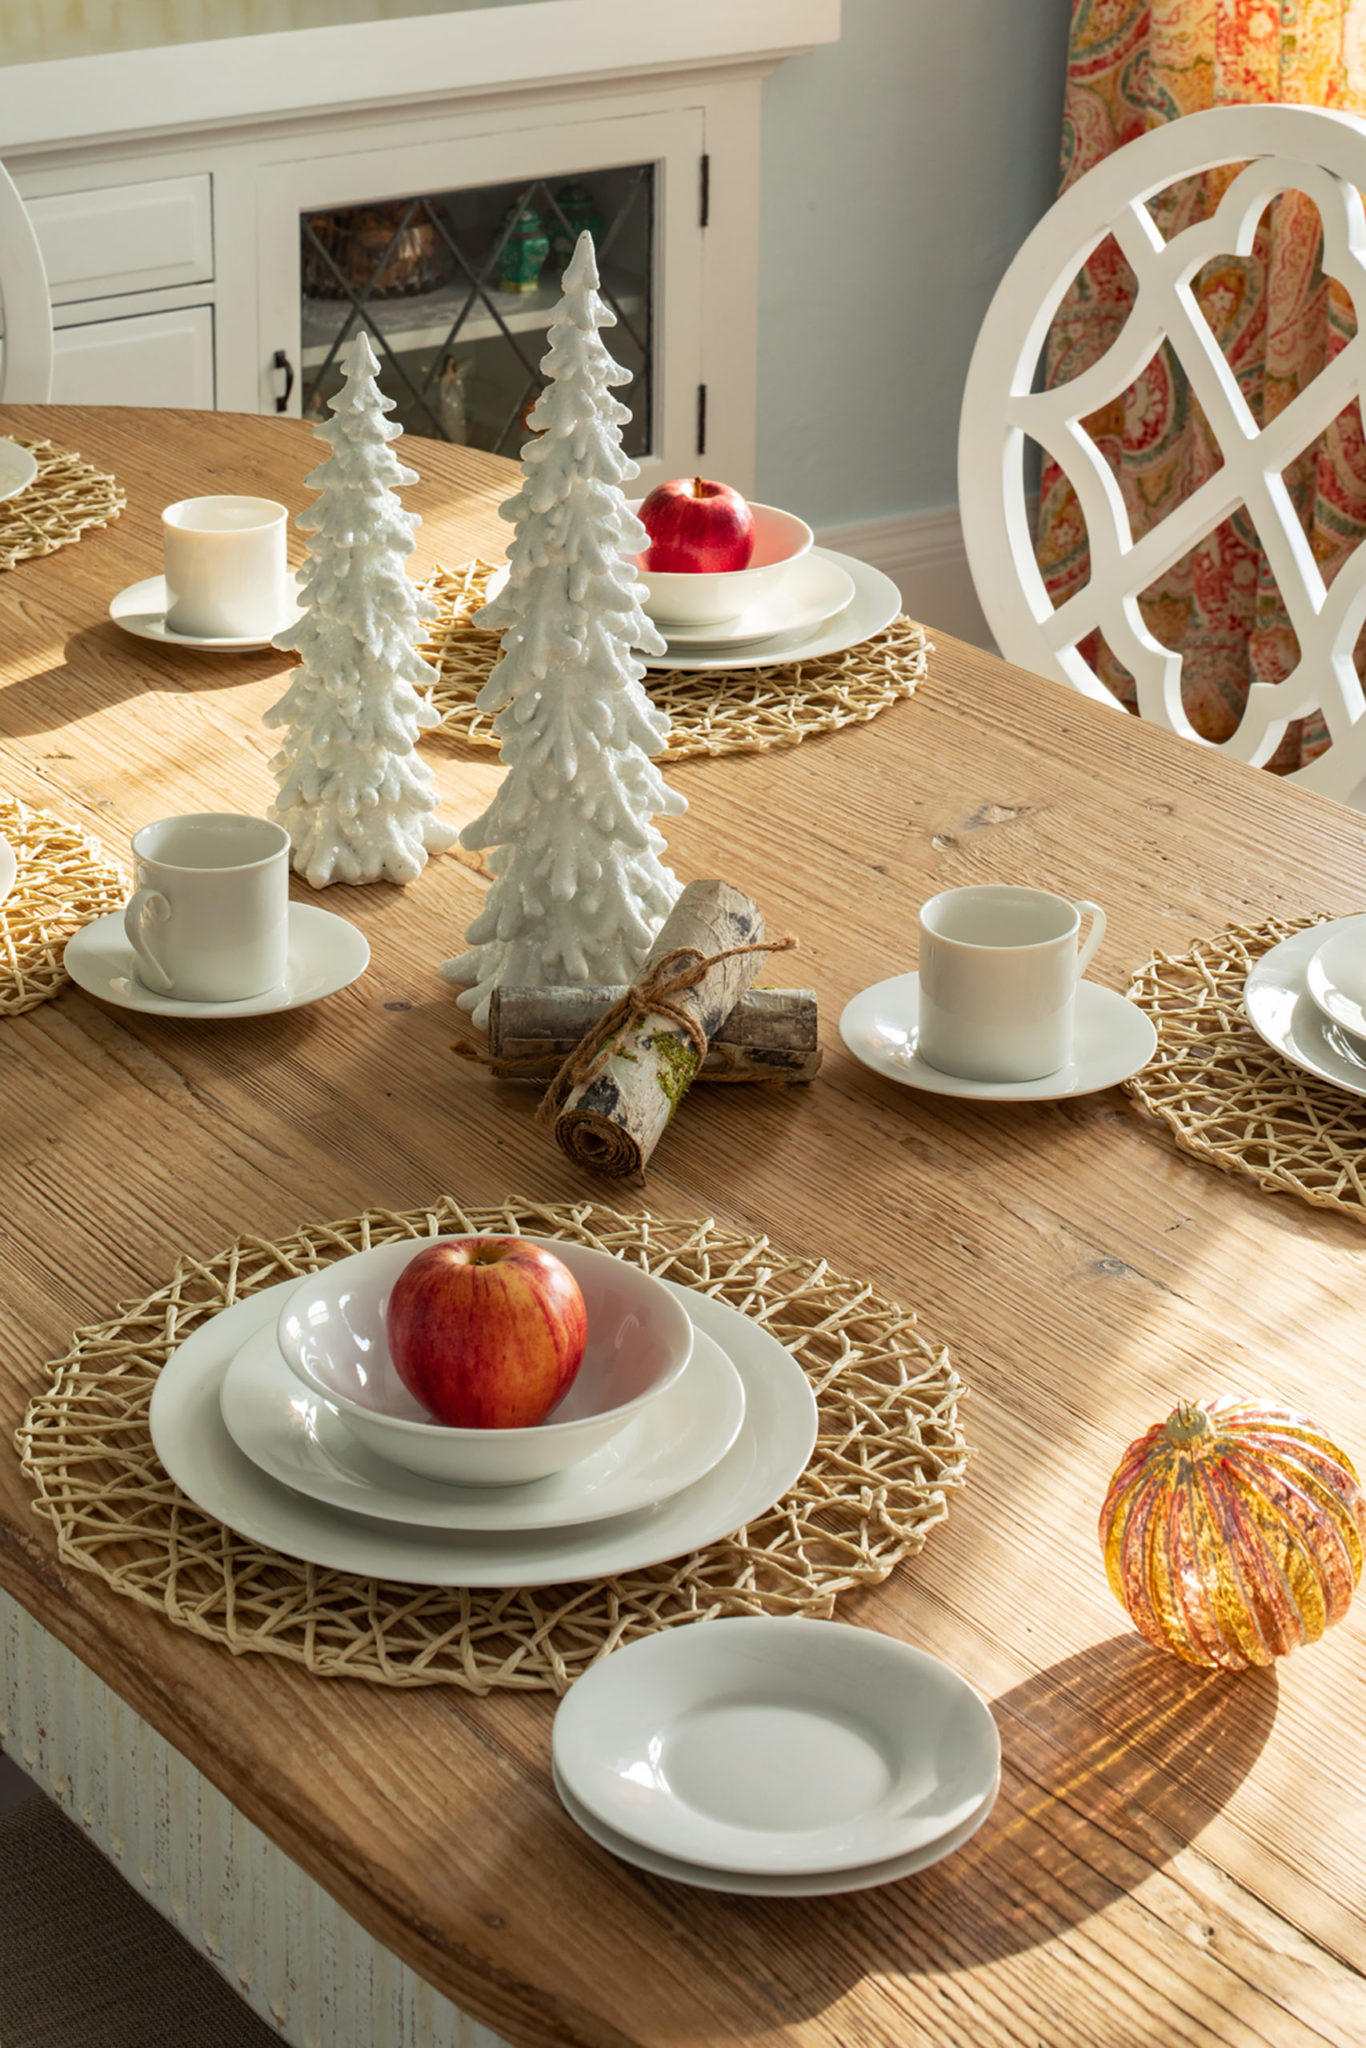 Mother Nature Inspired Holiday Décor in Dining Room